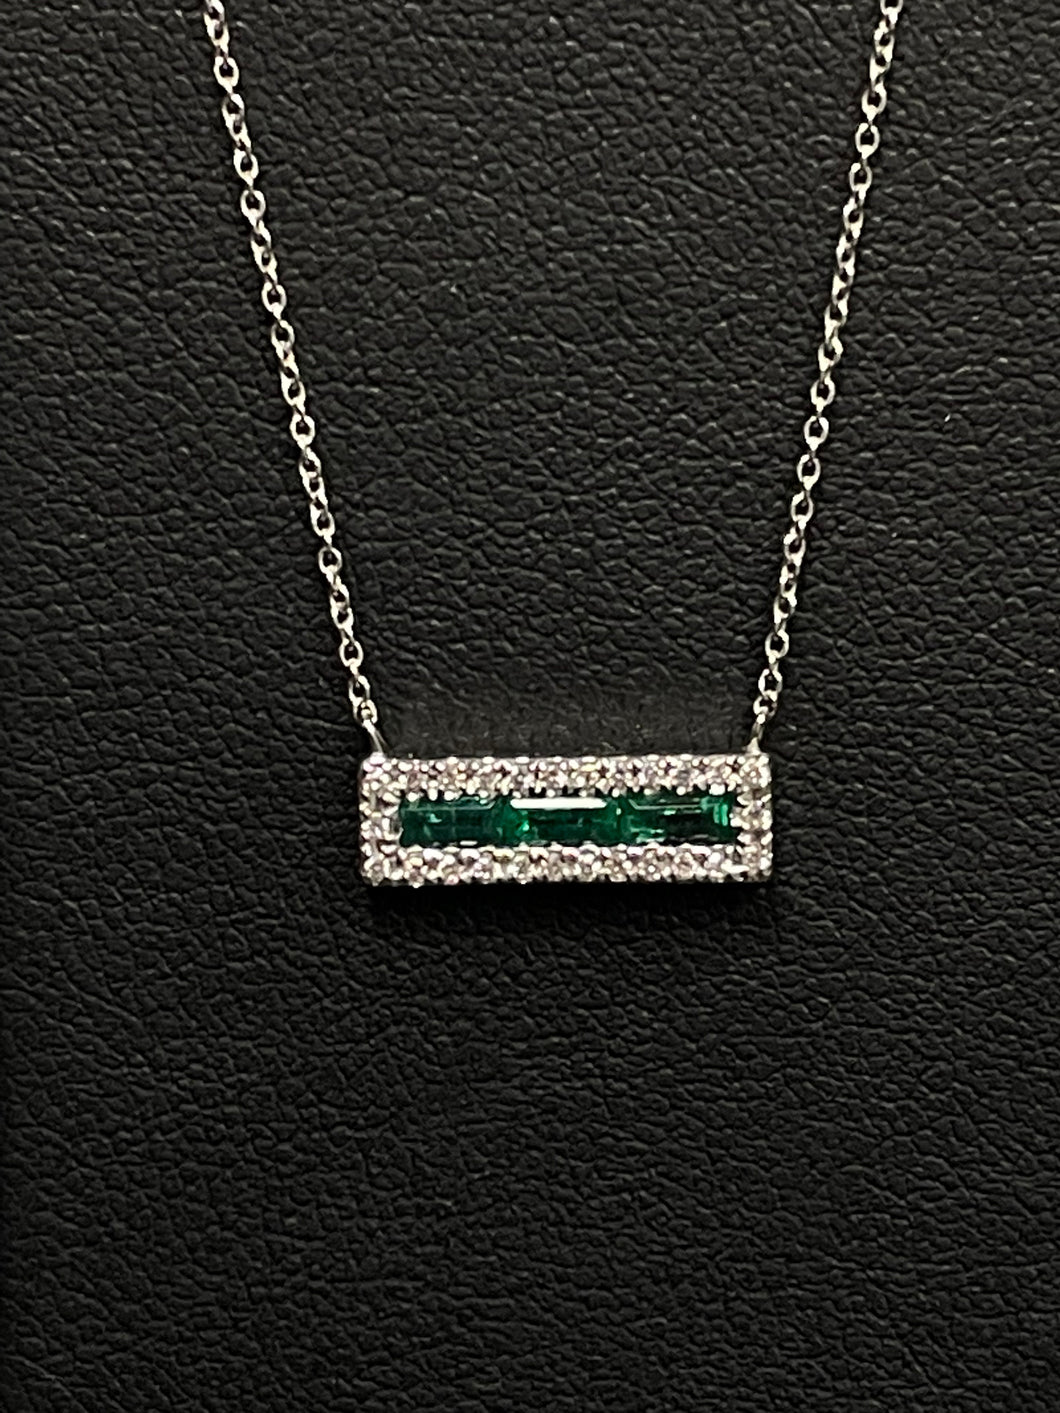 One Ladies 14k White Gold Emerald and Diamond Pendant on and adjustable 16